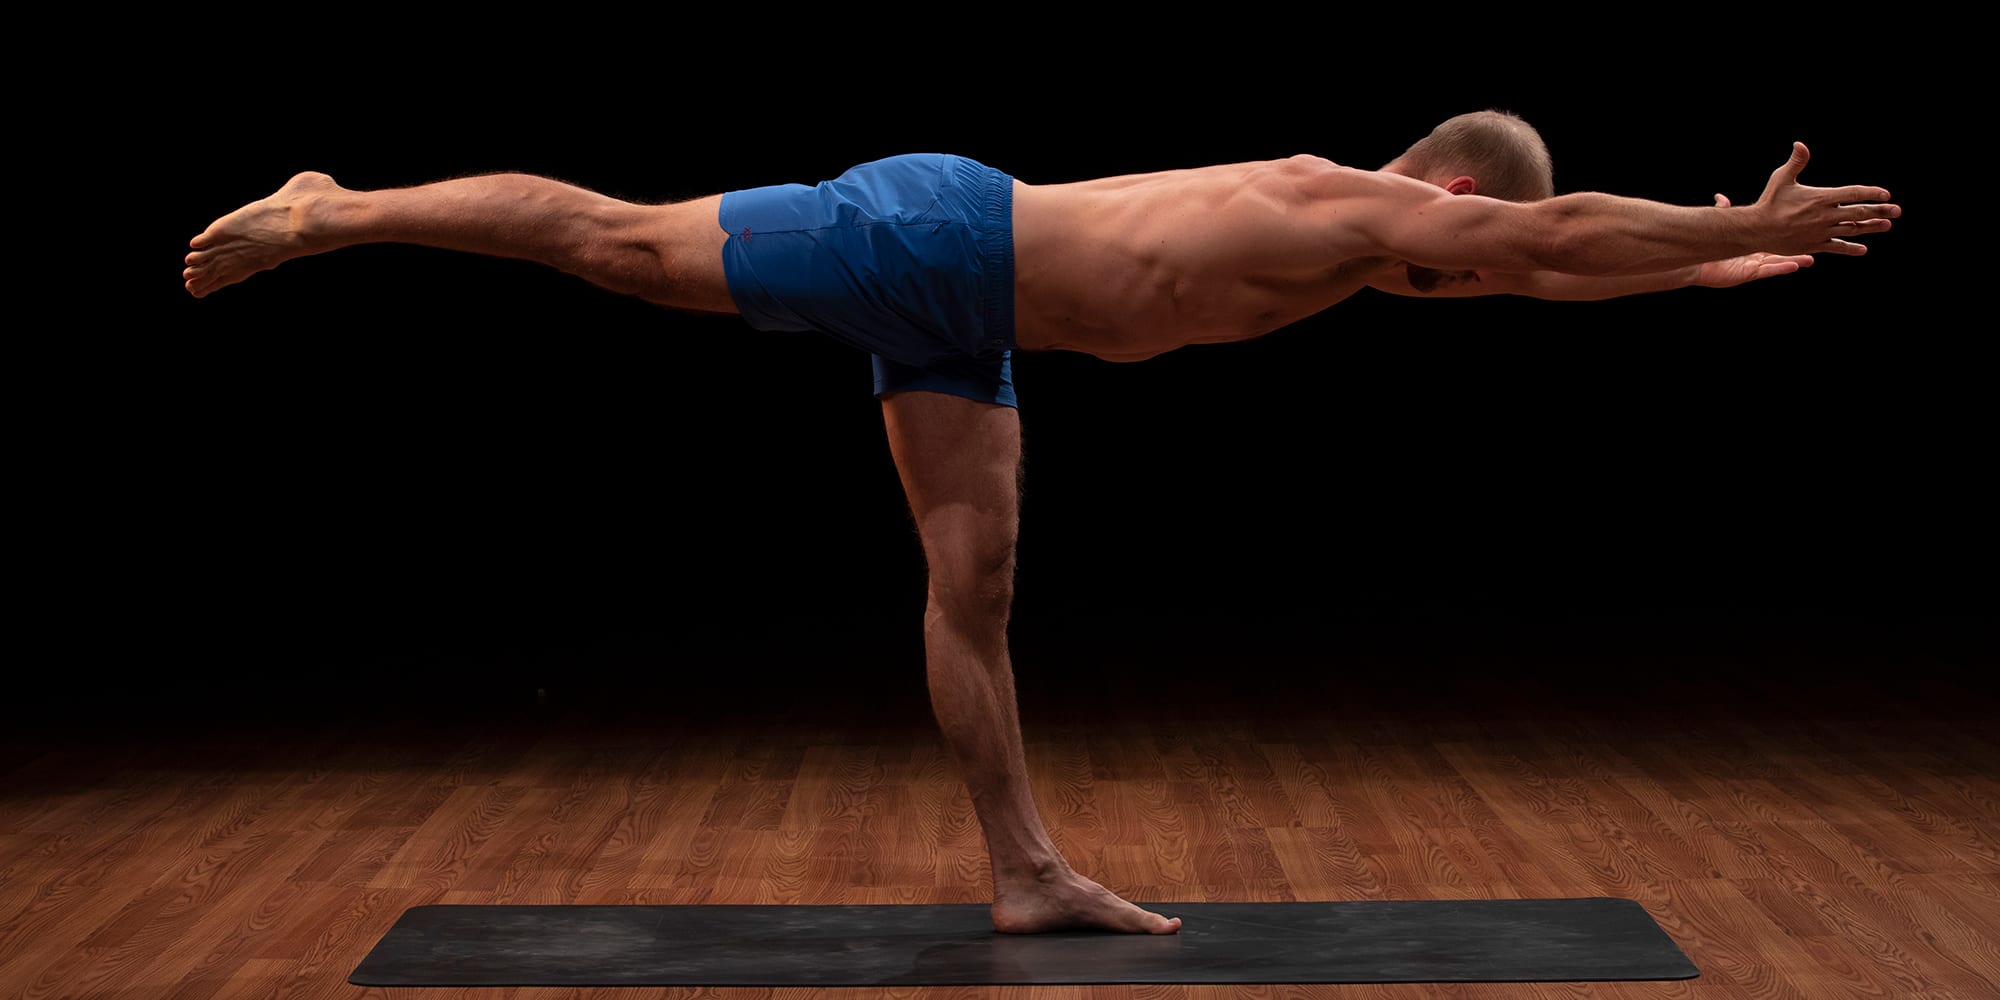 The 15 Best Basic Yoga Poses for Beginners